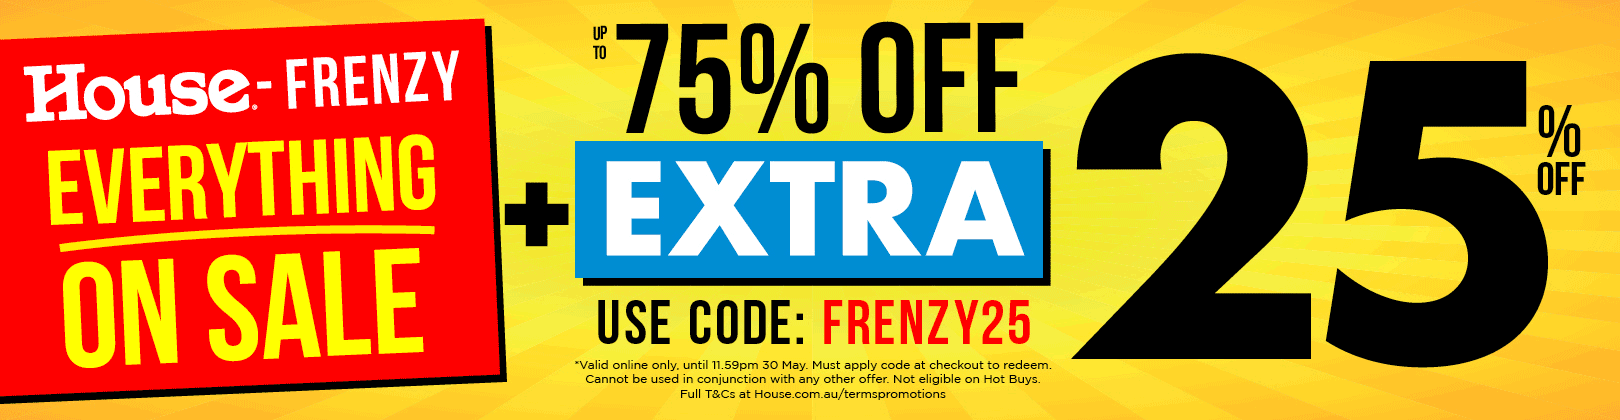 House Frenzy sale Up to 75% OFF + extra 25% OFF with coupon